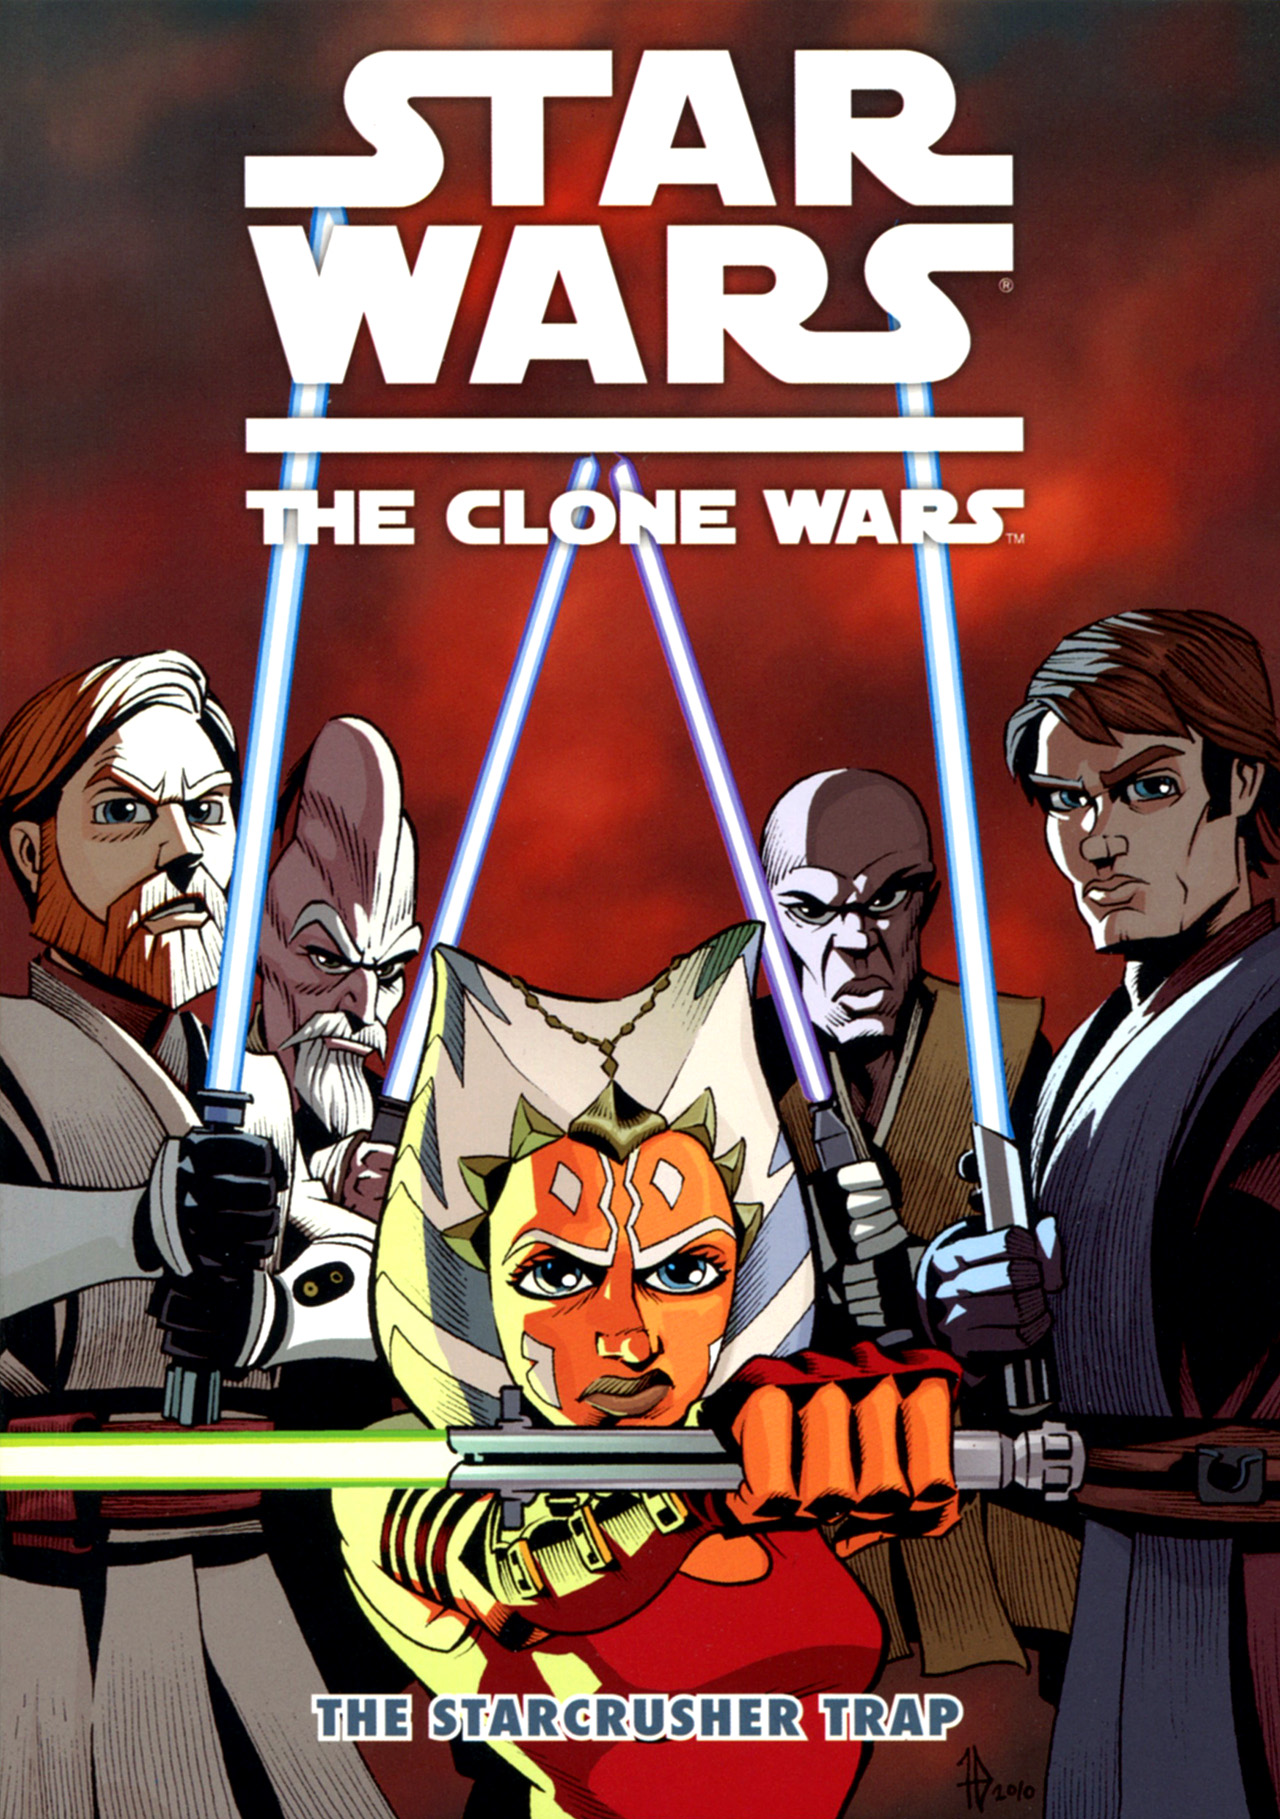 Read online Star Wars: The Clone Wars - The Starcrusher Trap comic -  Issue # Full - 1